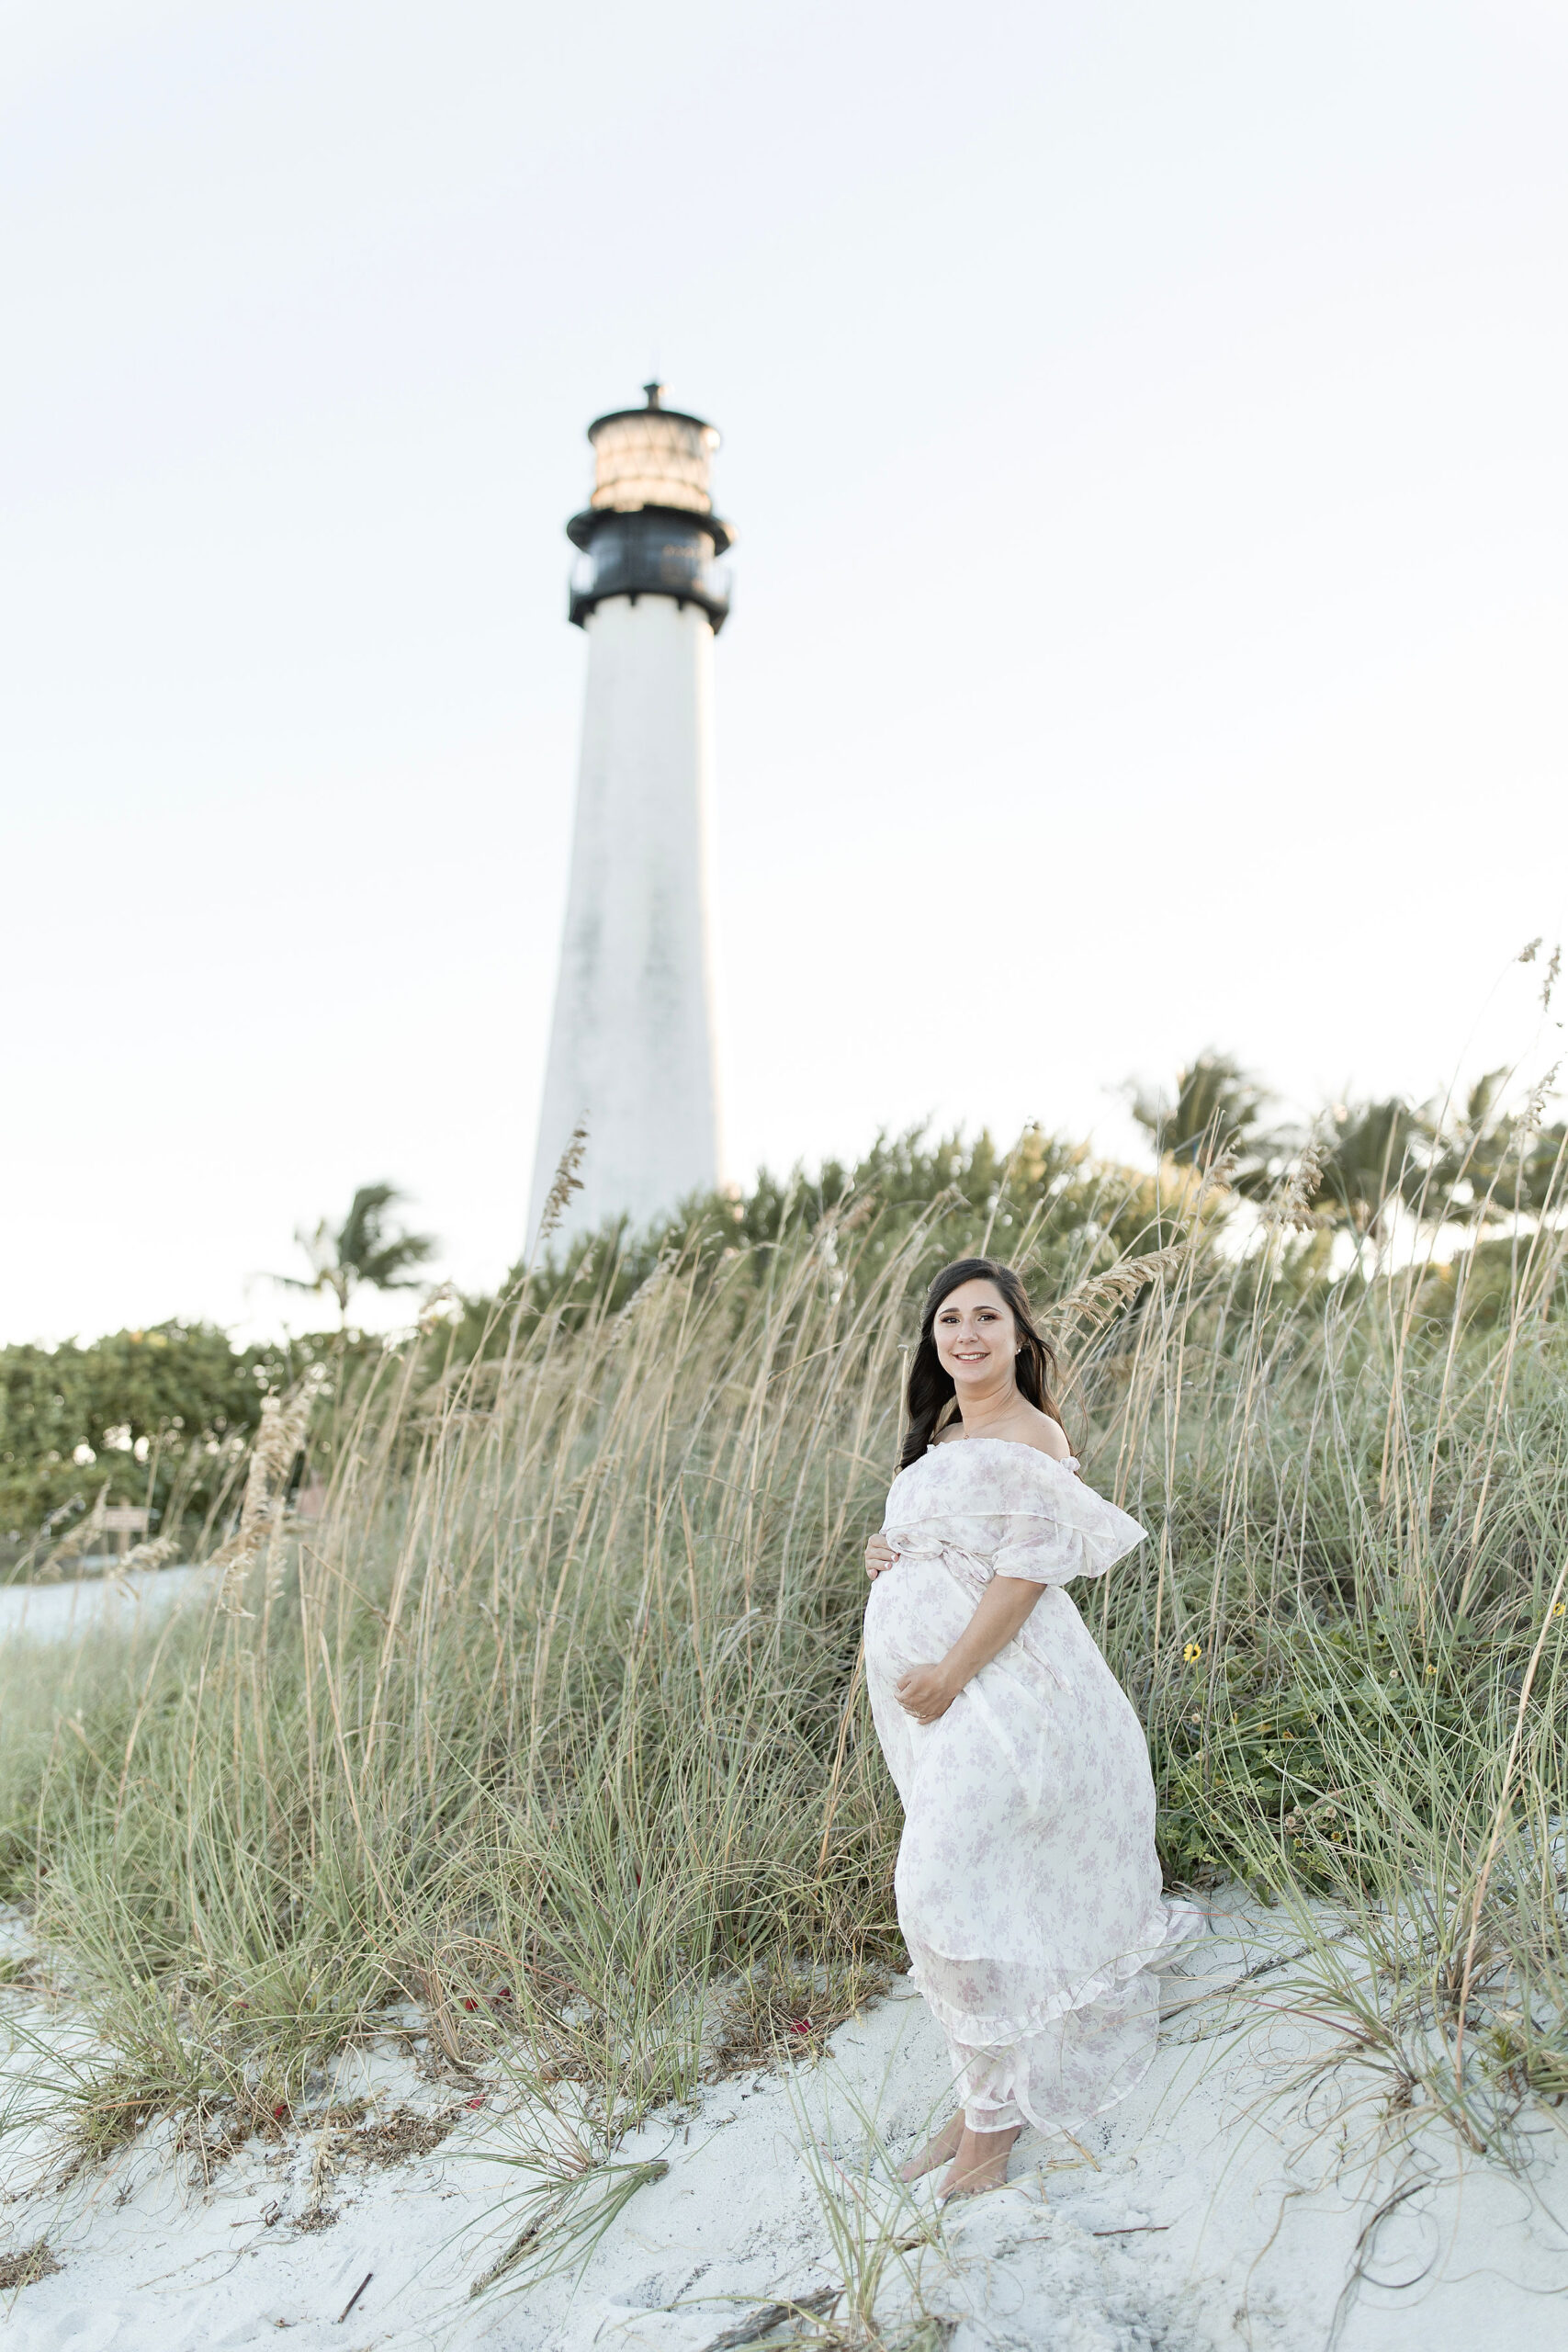 A mom to be in a floral maternity dress stands on a windy beach dune in front of a lighthouse after some miami prenatal yoga